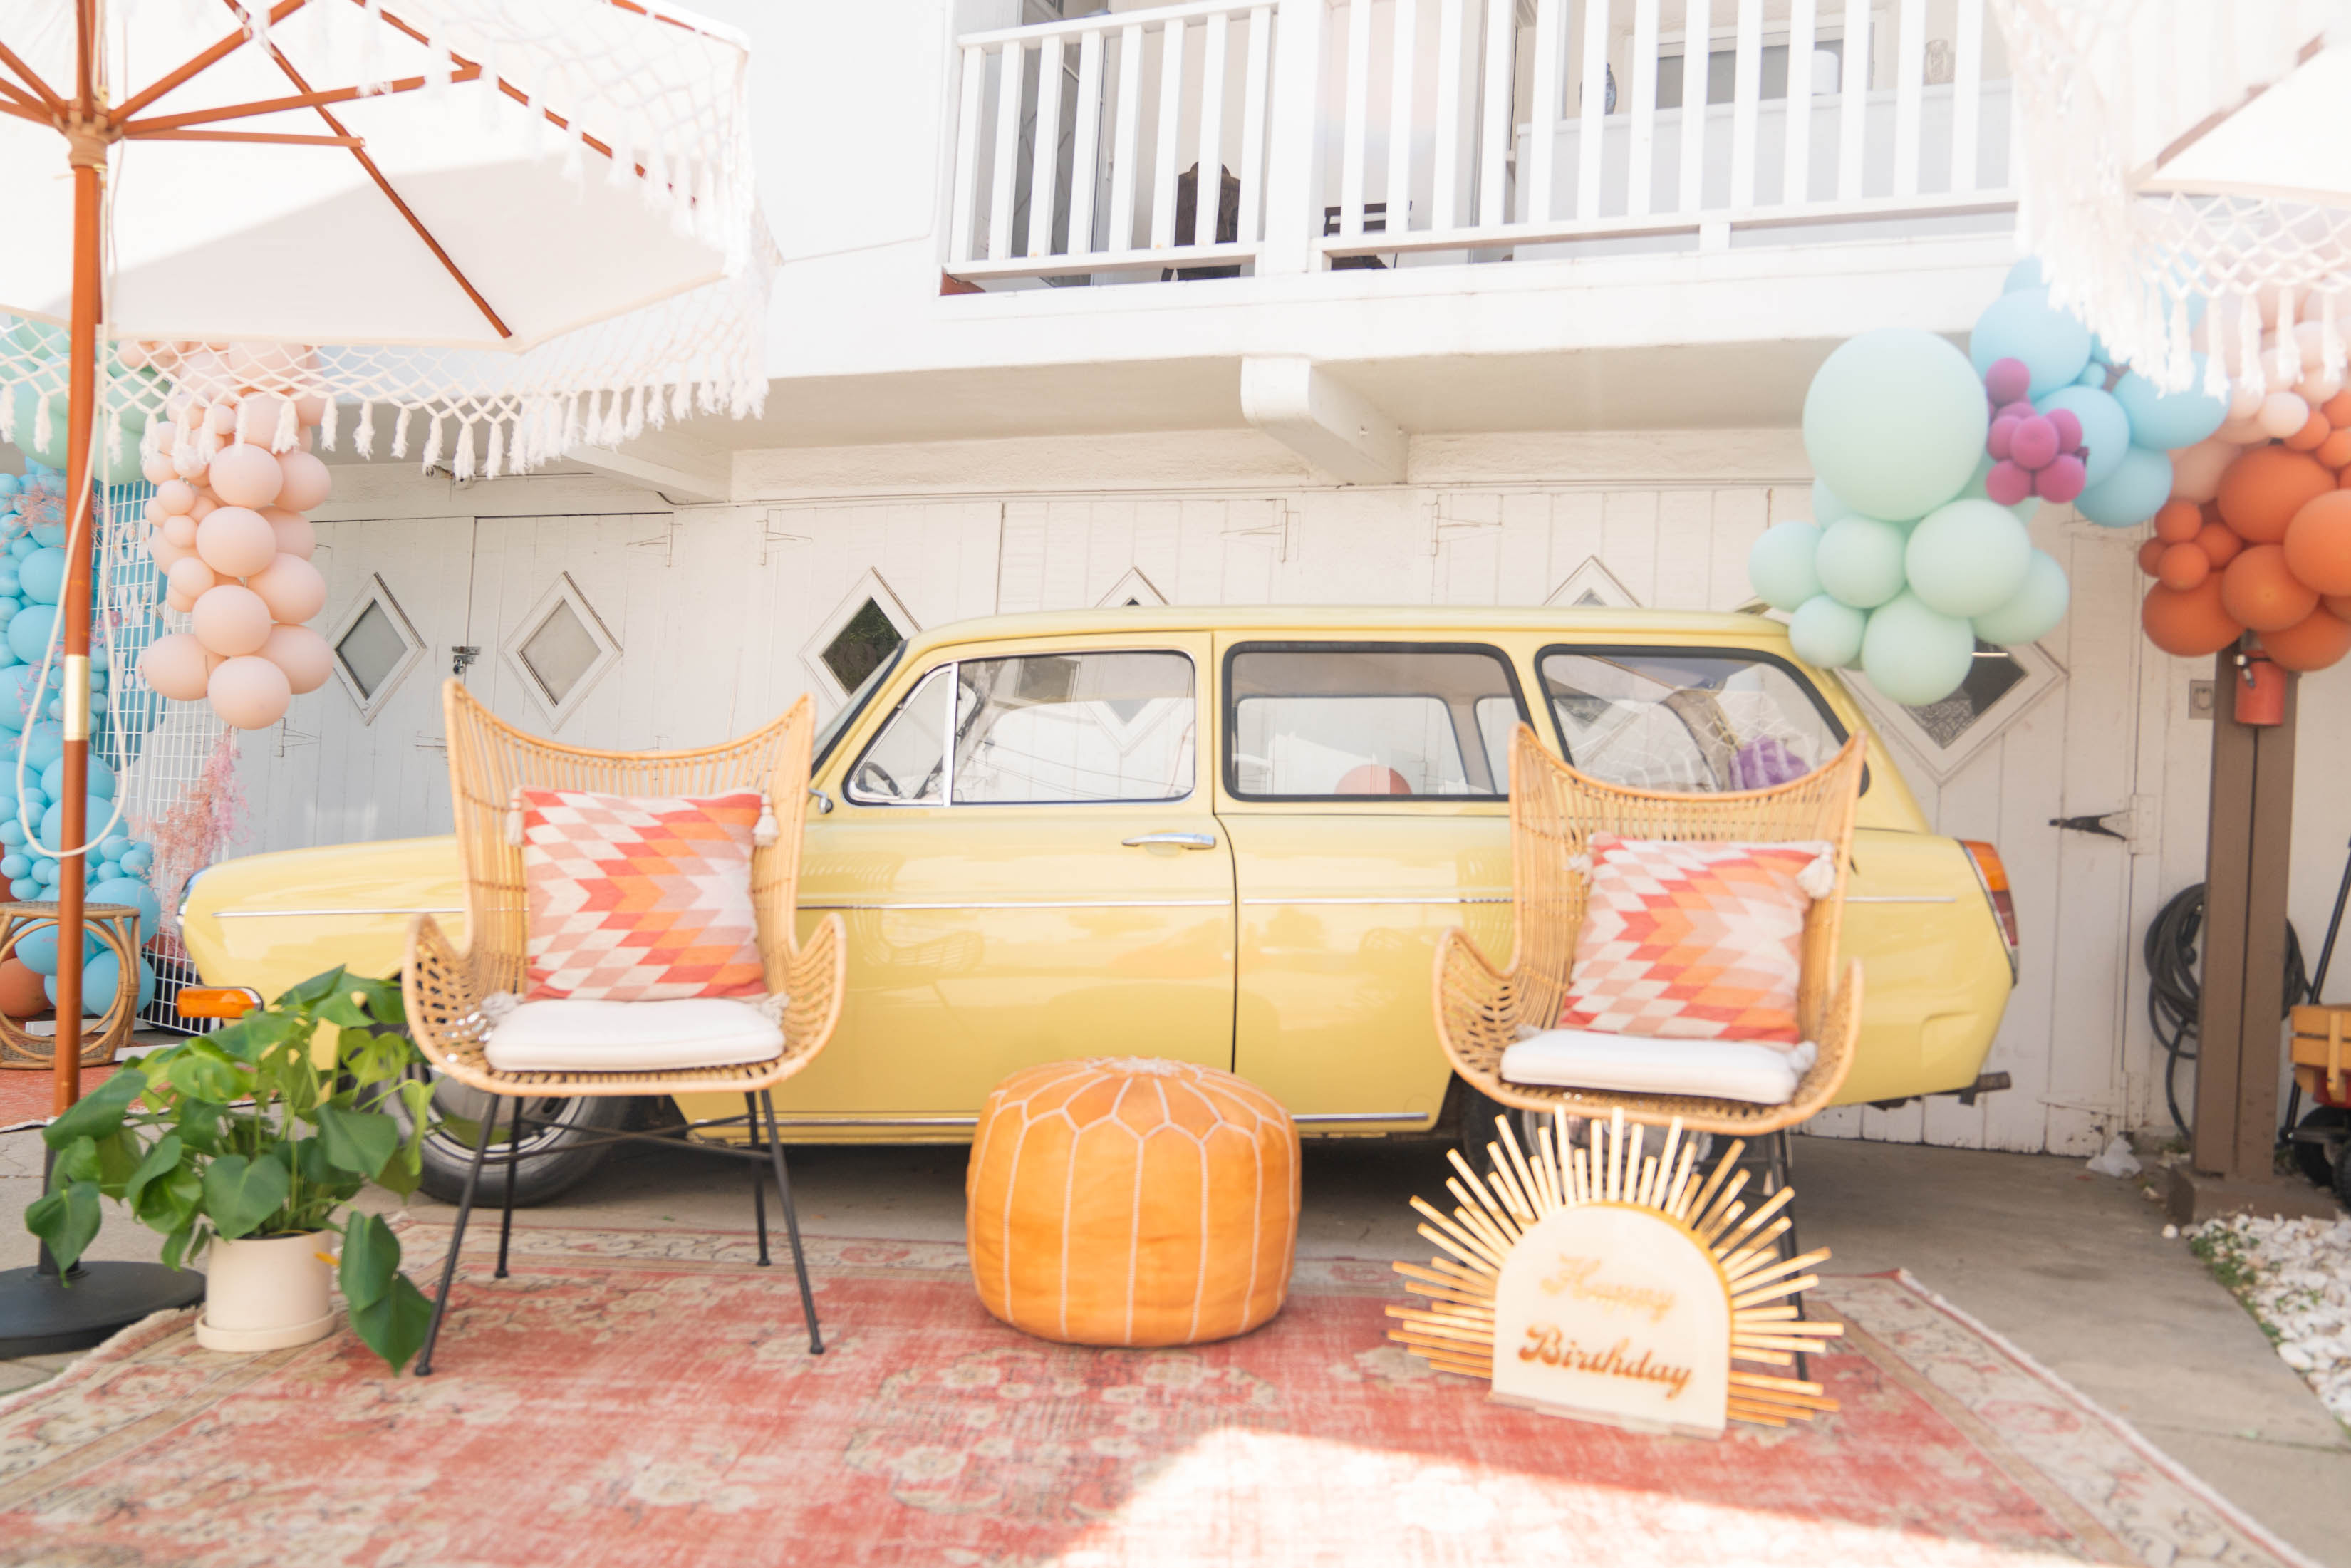 balloon backdrop
birthday inspiration
fig and whiskey
photo booth set up
vintage car for event
event designer
retro party
70's party
70's party inspiration
kids peace and love party
kids birthday party ideas